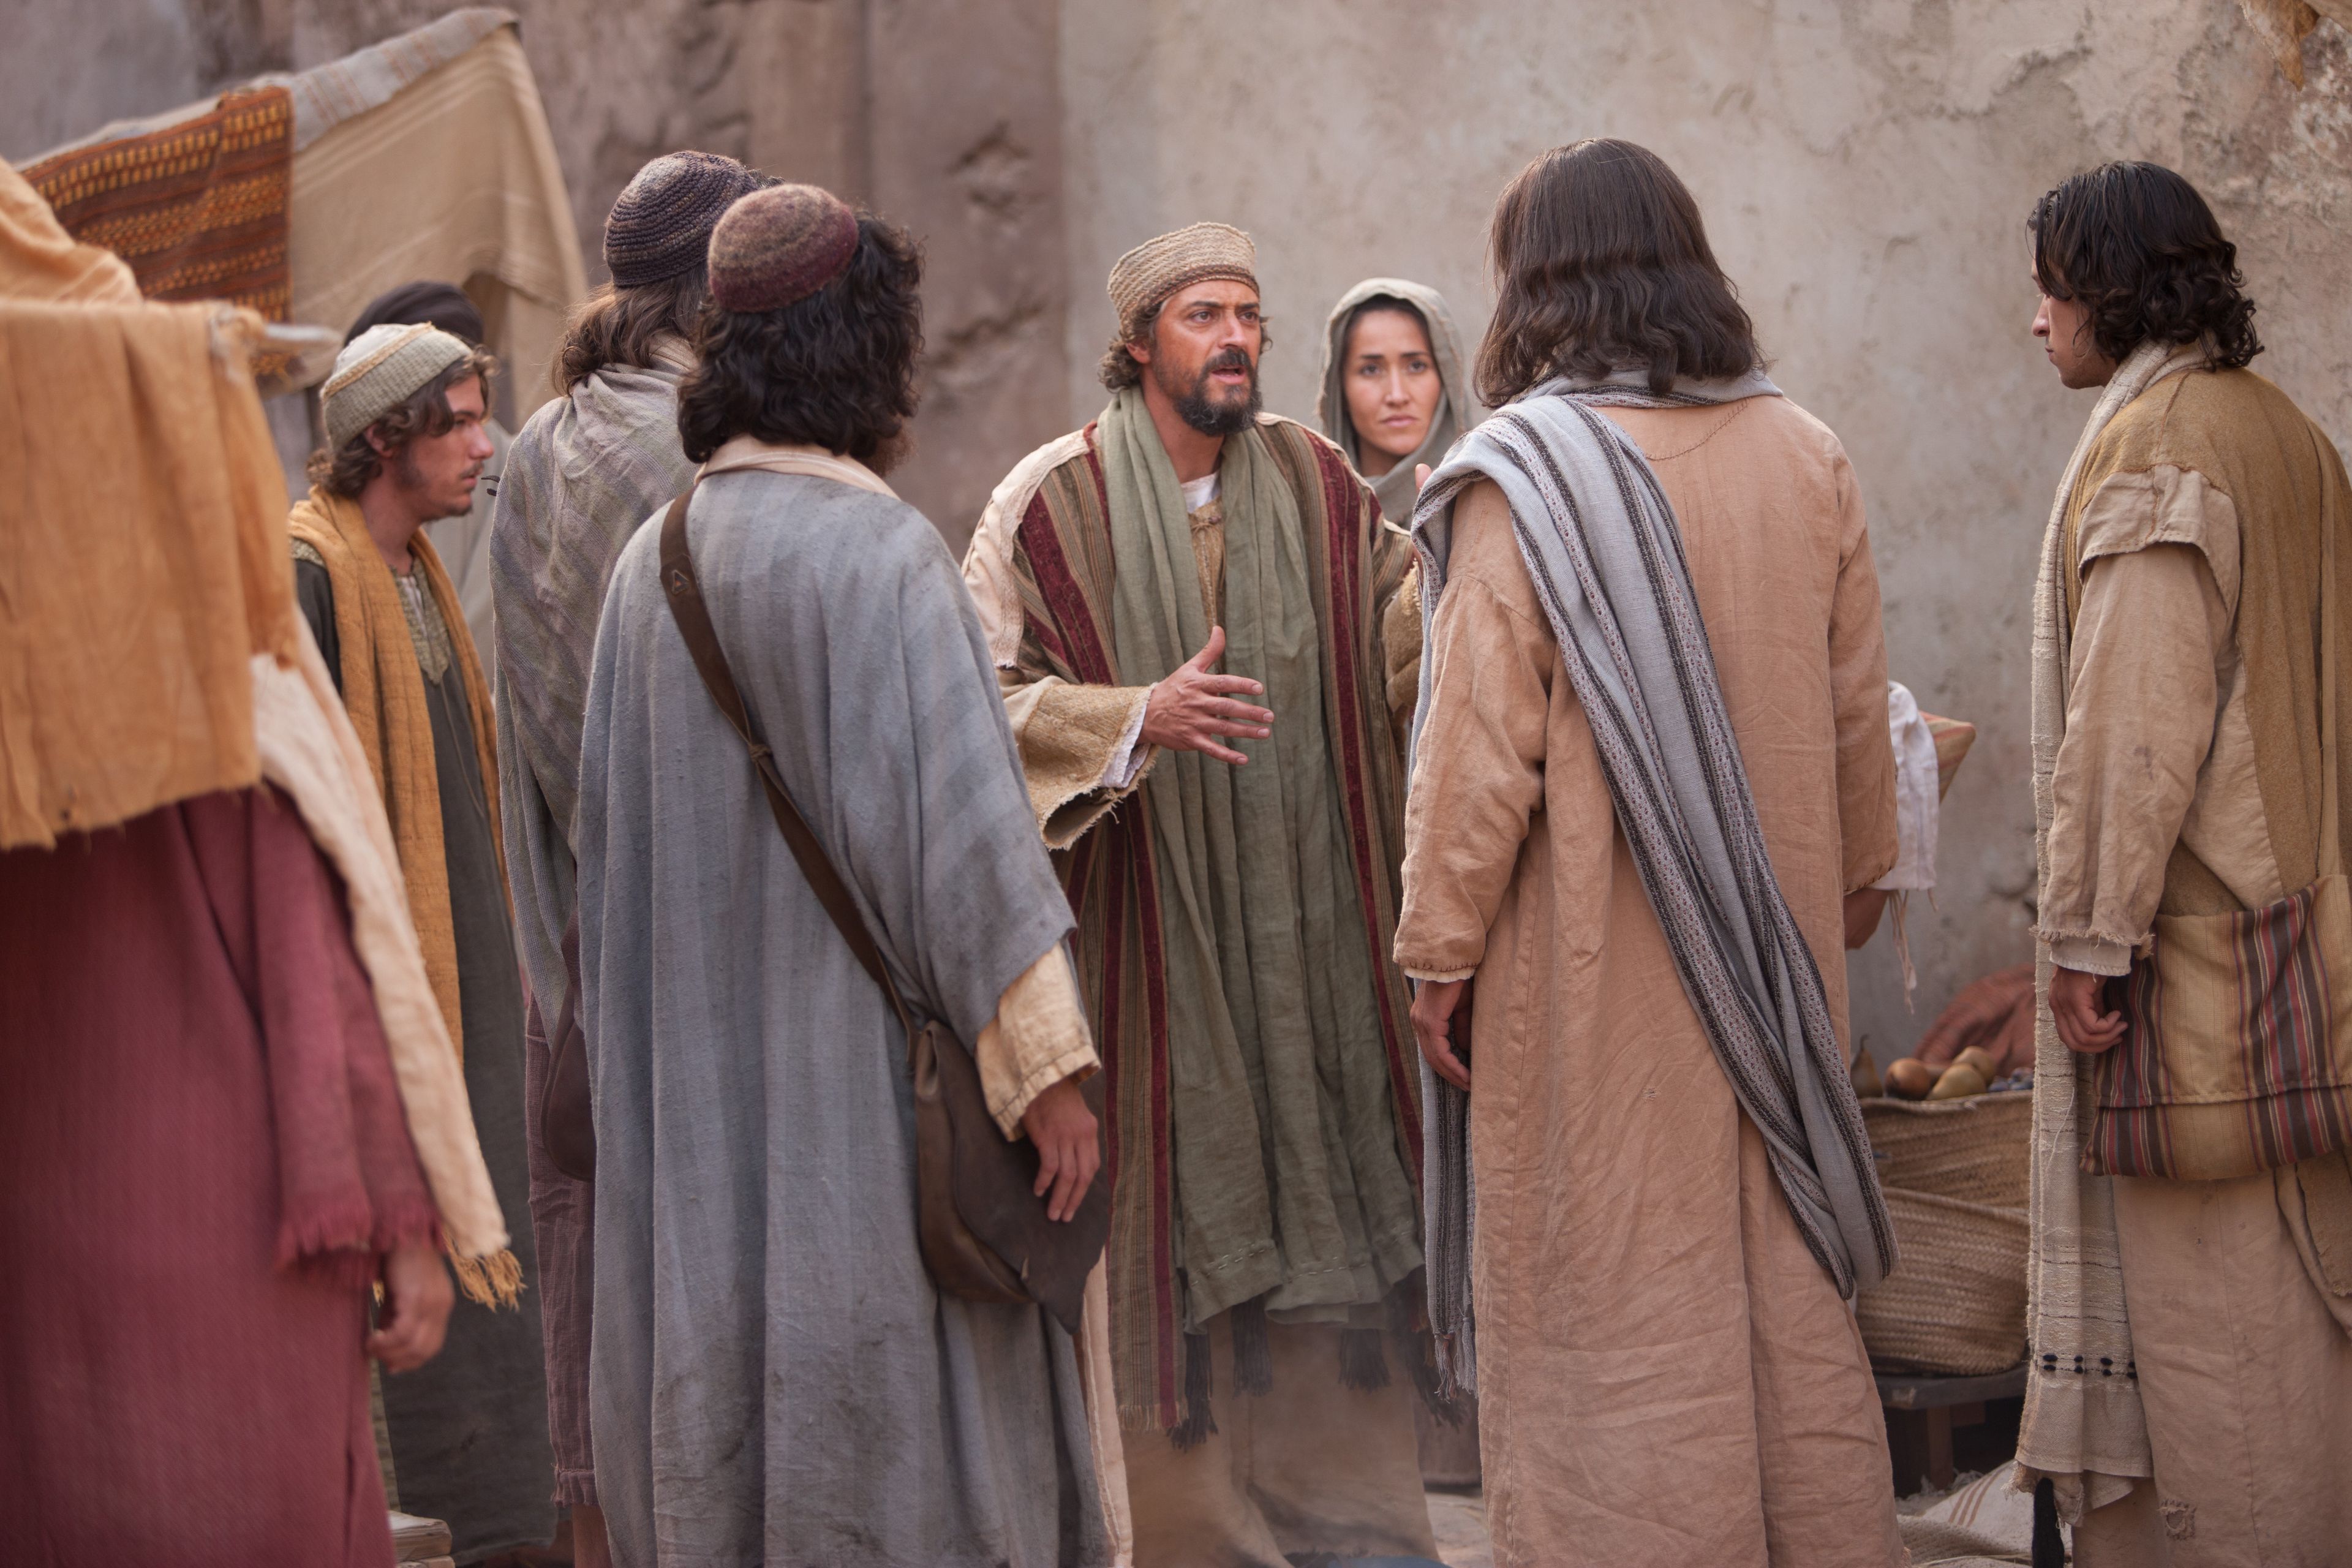 Jairus, whose daughter is sick, seeks Christ on the street to ask Him for His help.